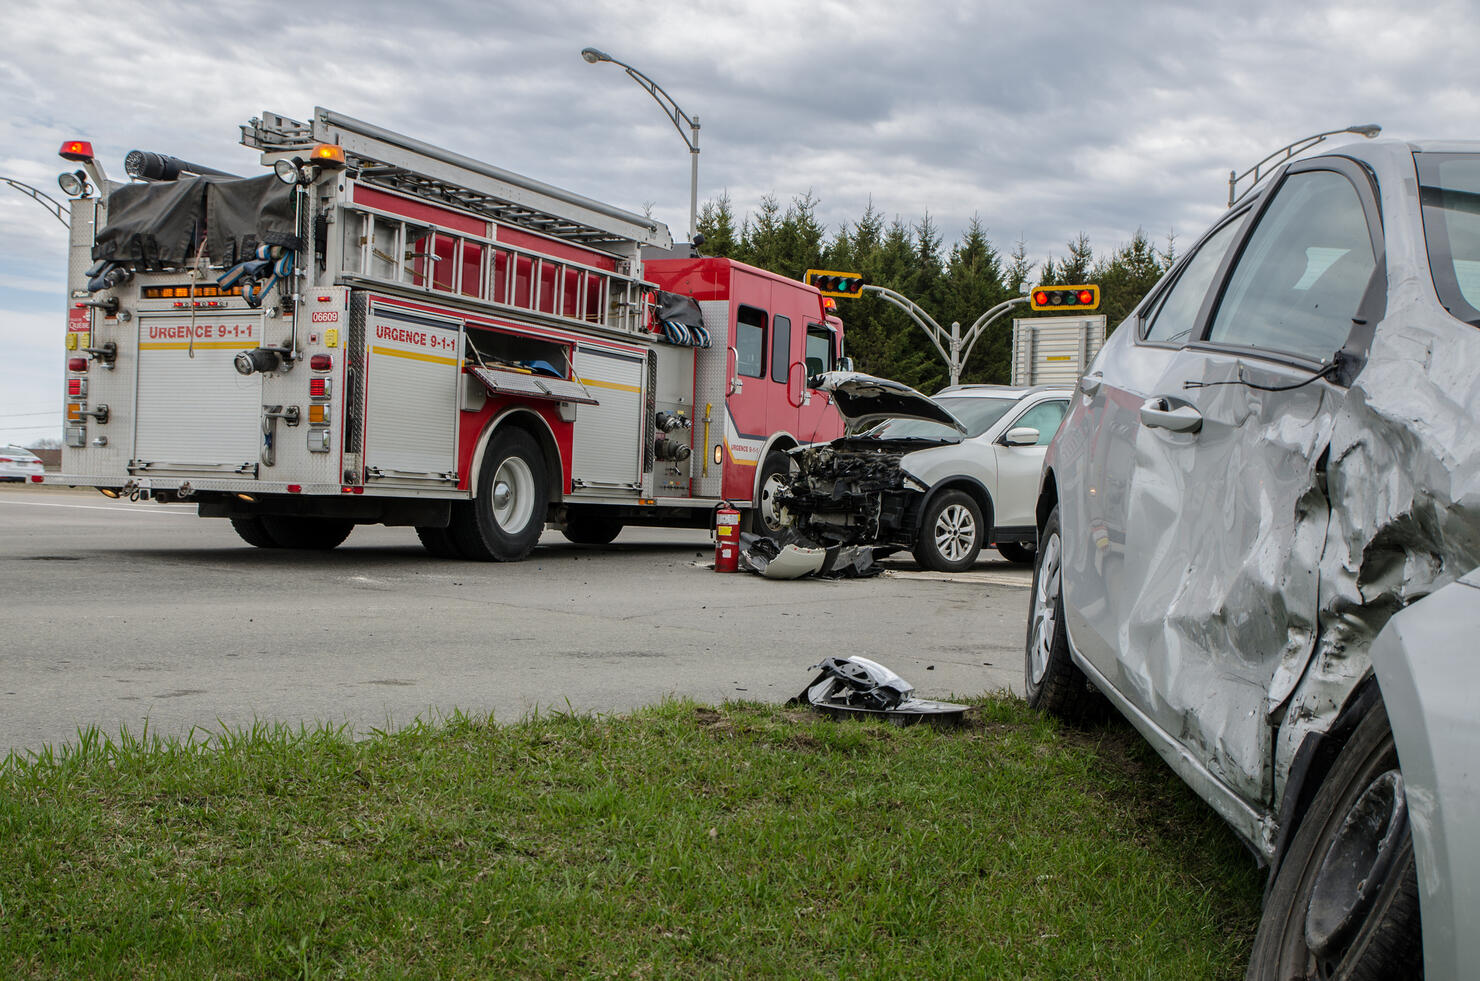 Two cars crashed in accident with firetruck behind